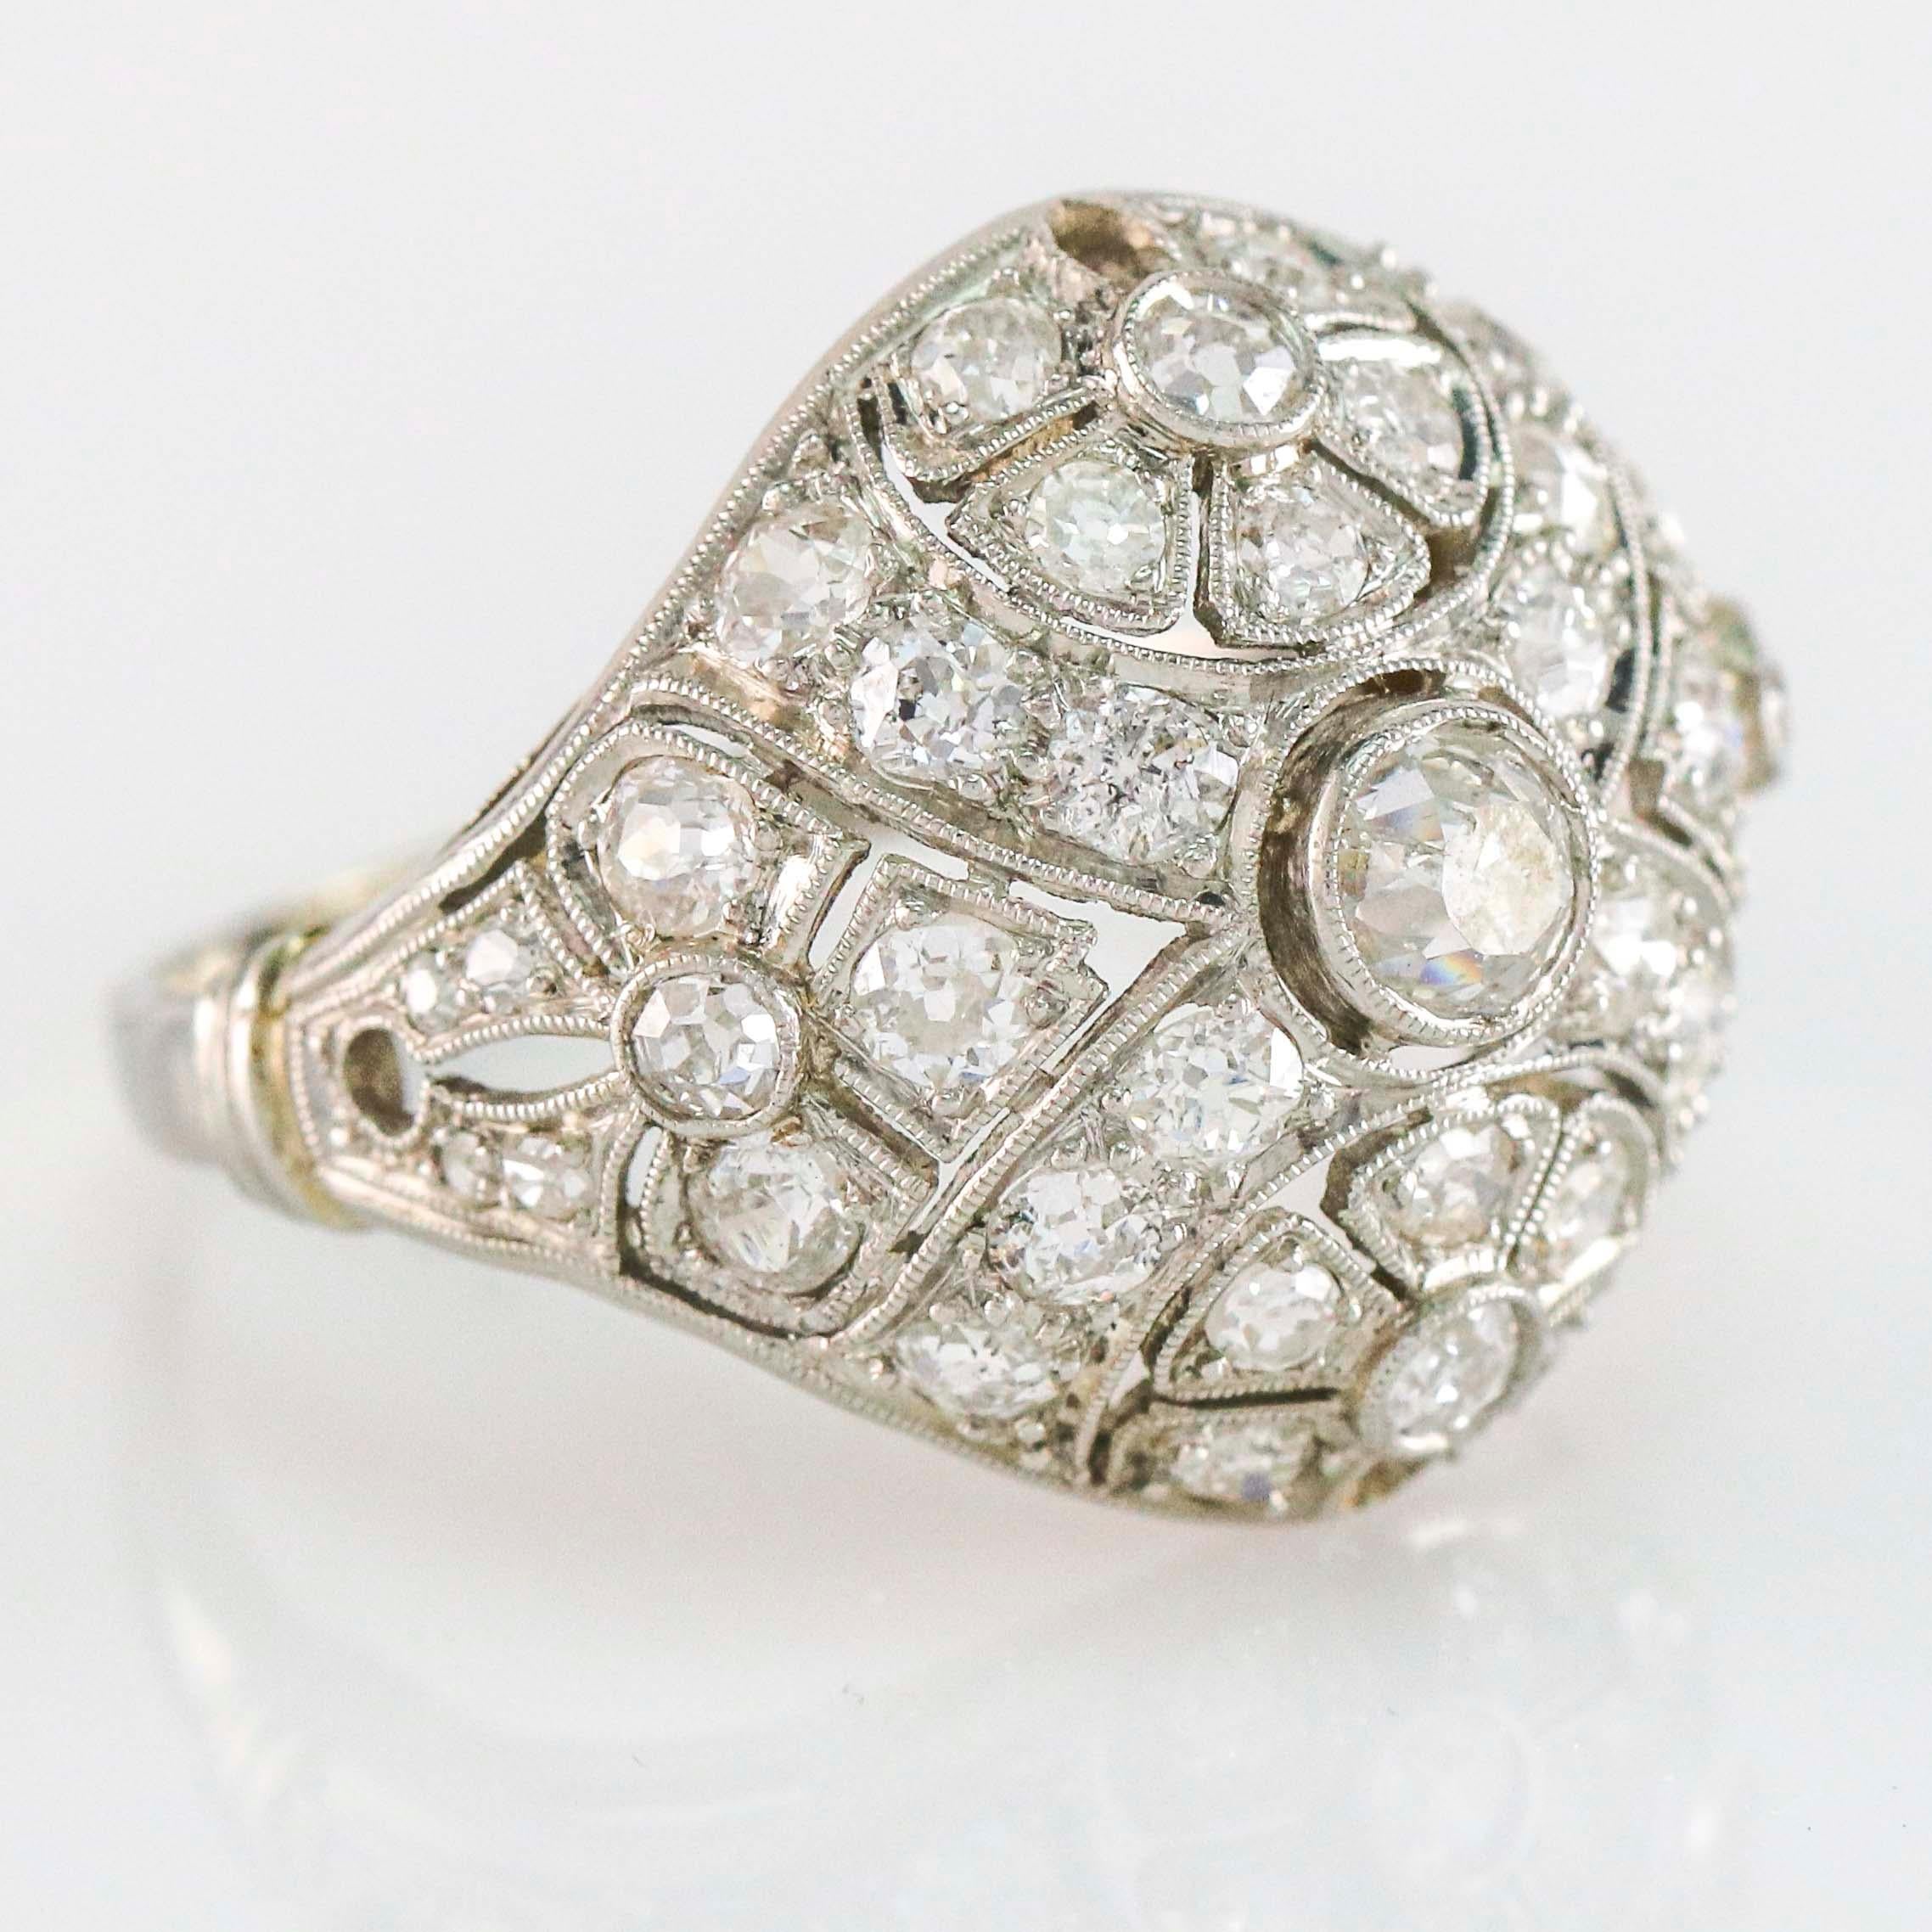 Edwardian diamond dome ring in platinum. The ring features a floral design with filigree and openwork.